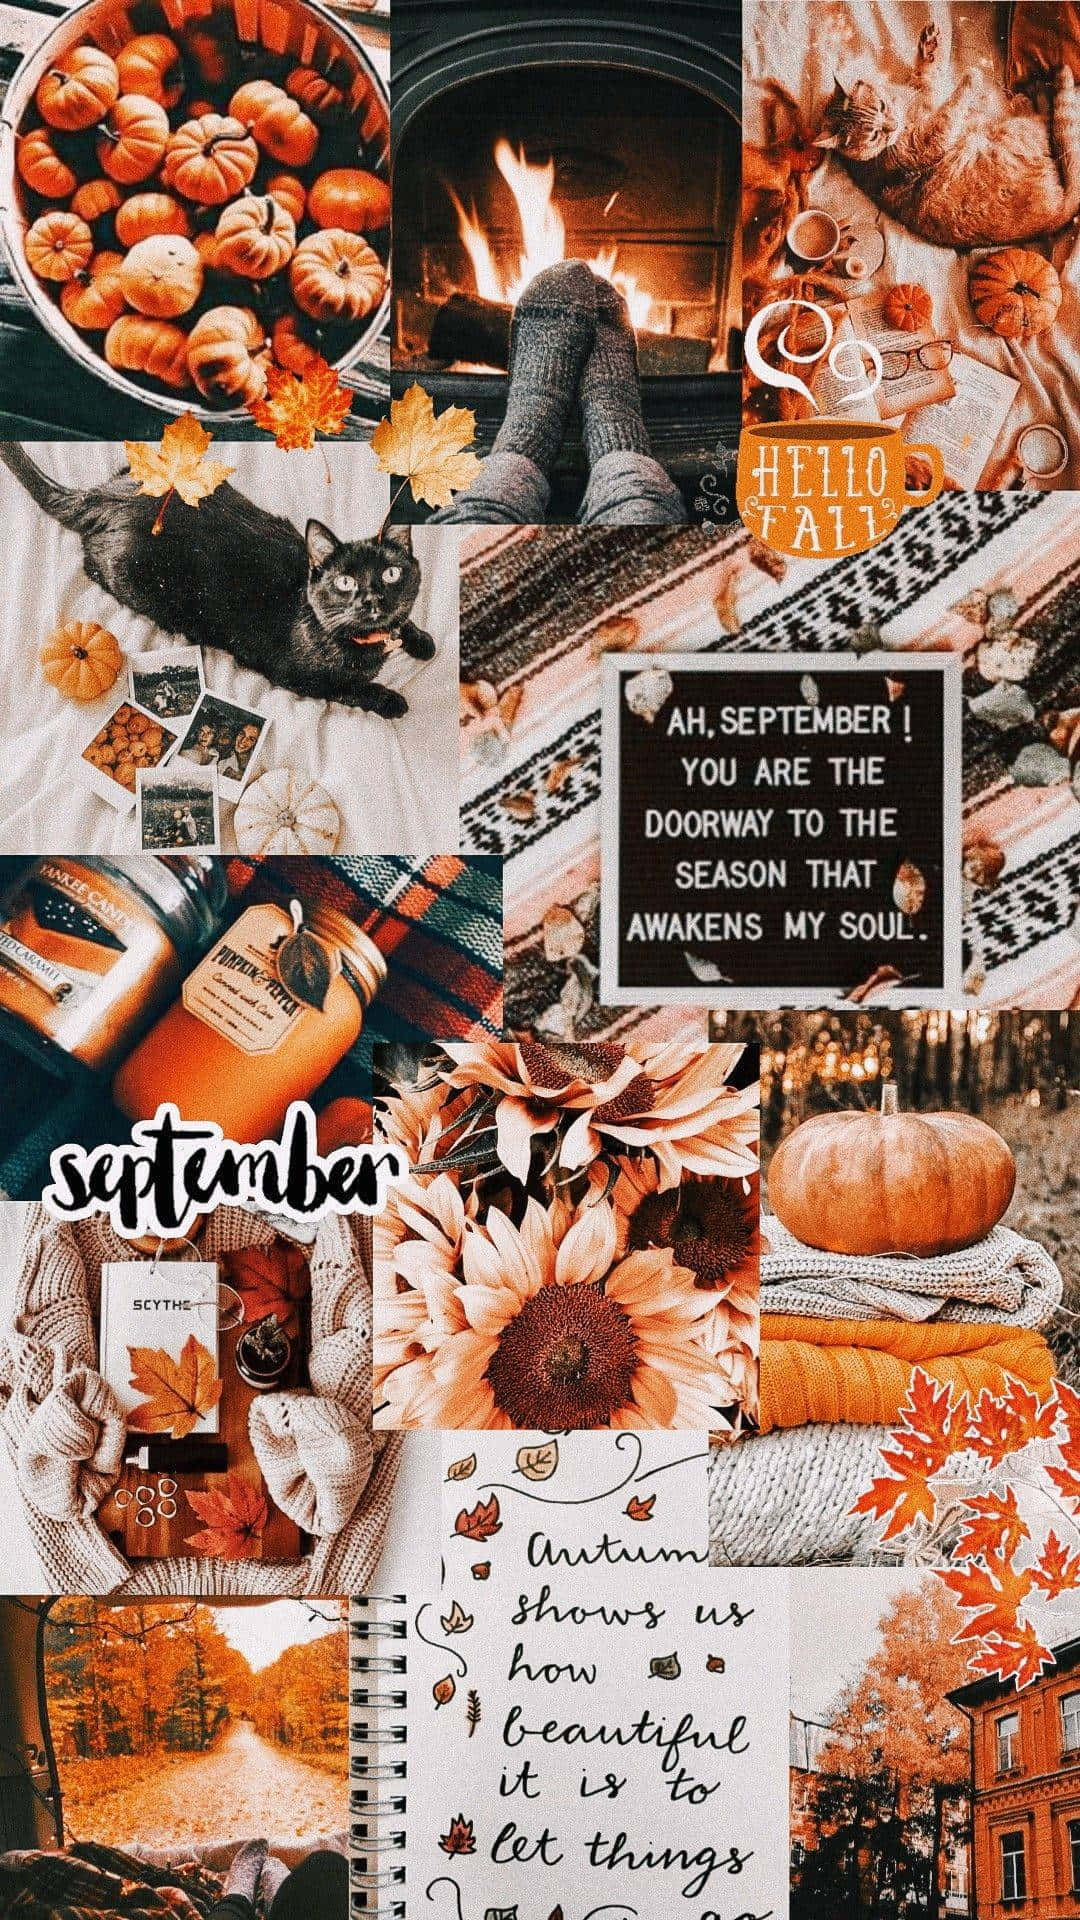 Cute backgrounds inspired by fall